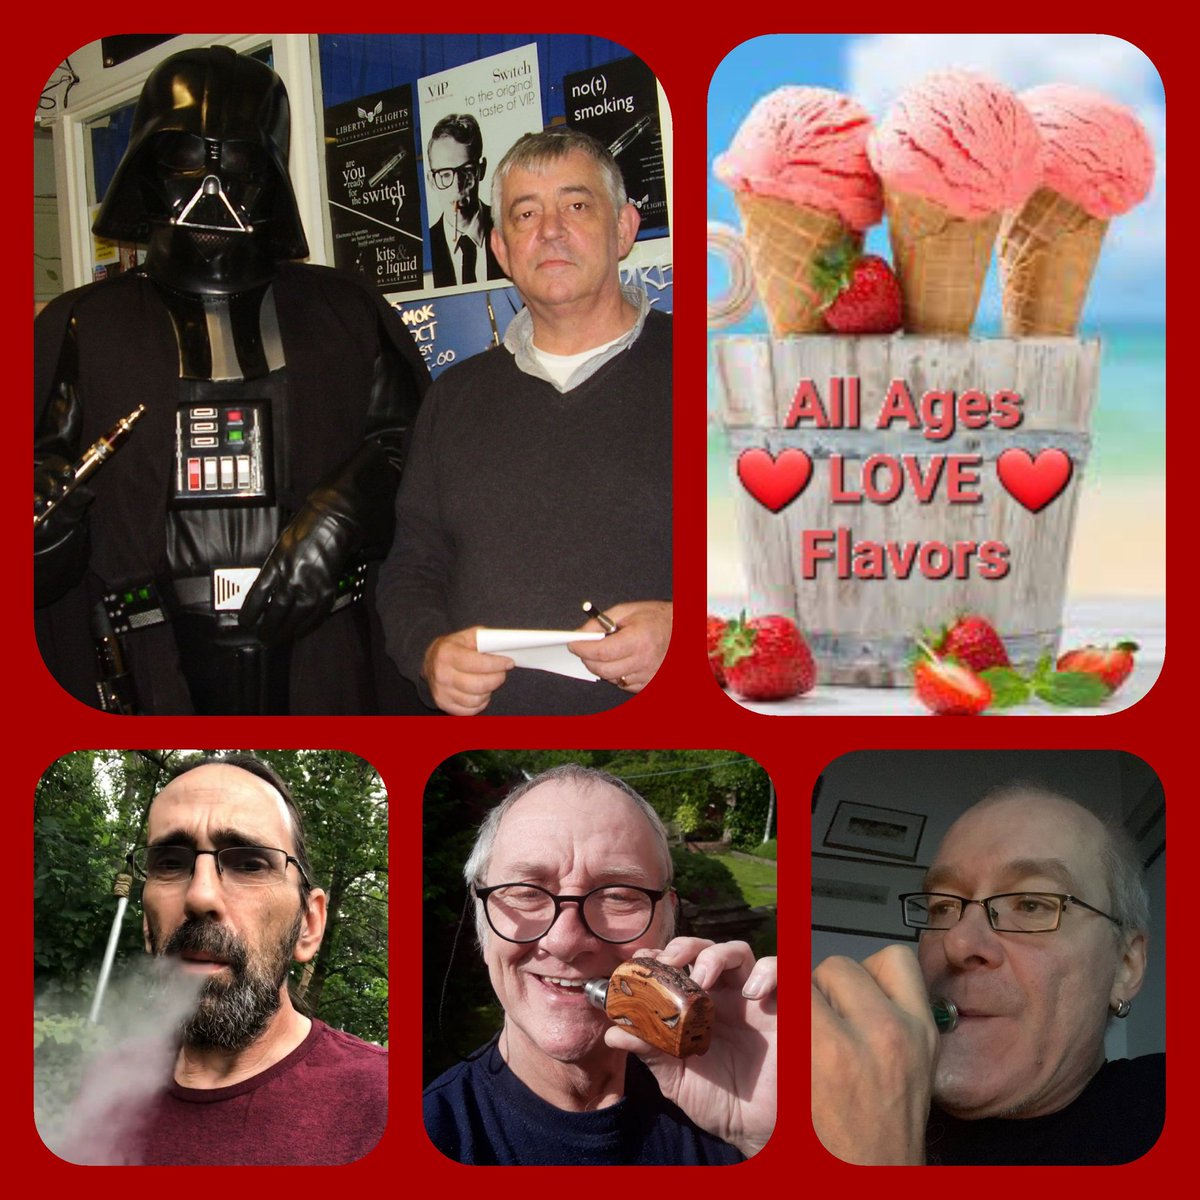 @RespectVapers @PantherNoster @hefferk Hats off to you for your testimony! Big congrats for your Success in Quiting! 🥳🥳 

I feel the same. Flavors are Very  Nessacery for new quitters and ones who haven't smoked in years! After all, who enjoys an old wet sock taste when all you want is to pull it out of your life.